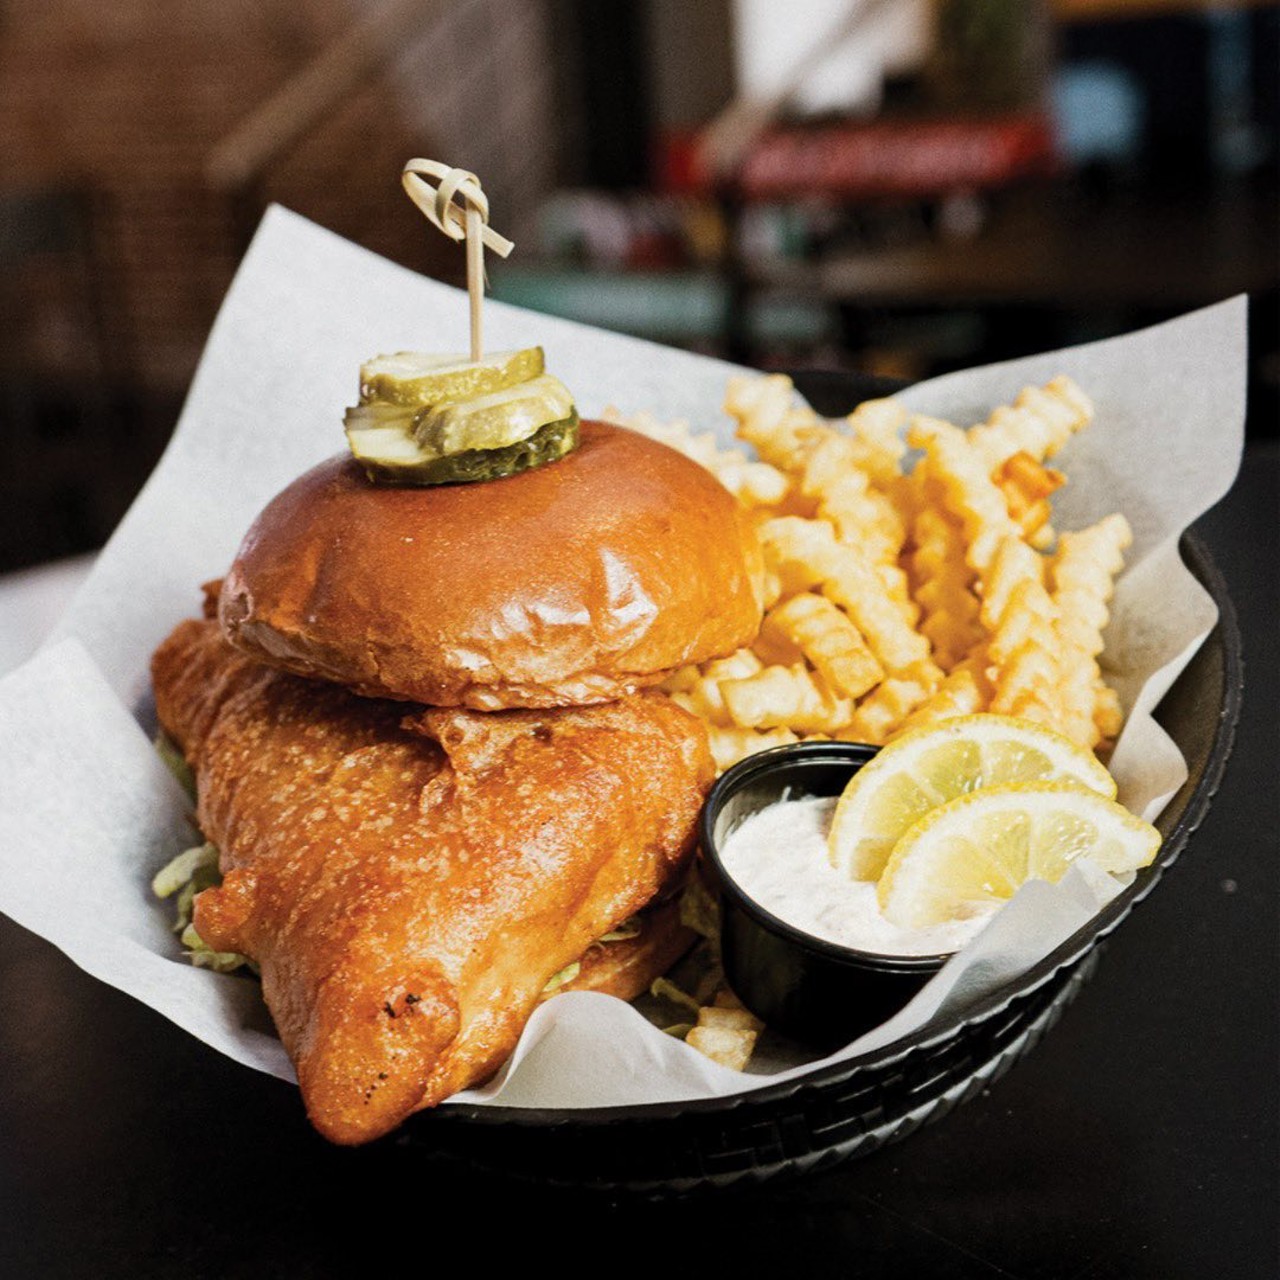 Braxton's Garage Beer Fish Fry
Braxton's taproom is hosting a Garage Beer Fish Fry. Grab your favorite Braxton drafts, along with Braxton-beer-battered seasonal fish nuggets or sandwich served with fries and homemade tartar sauce. 5-9 p.m. March 4. 331 E. 13th St., Pendleton.